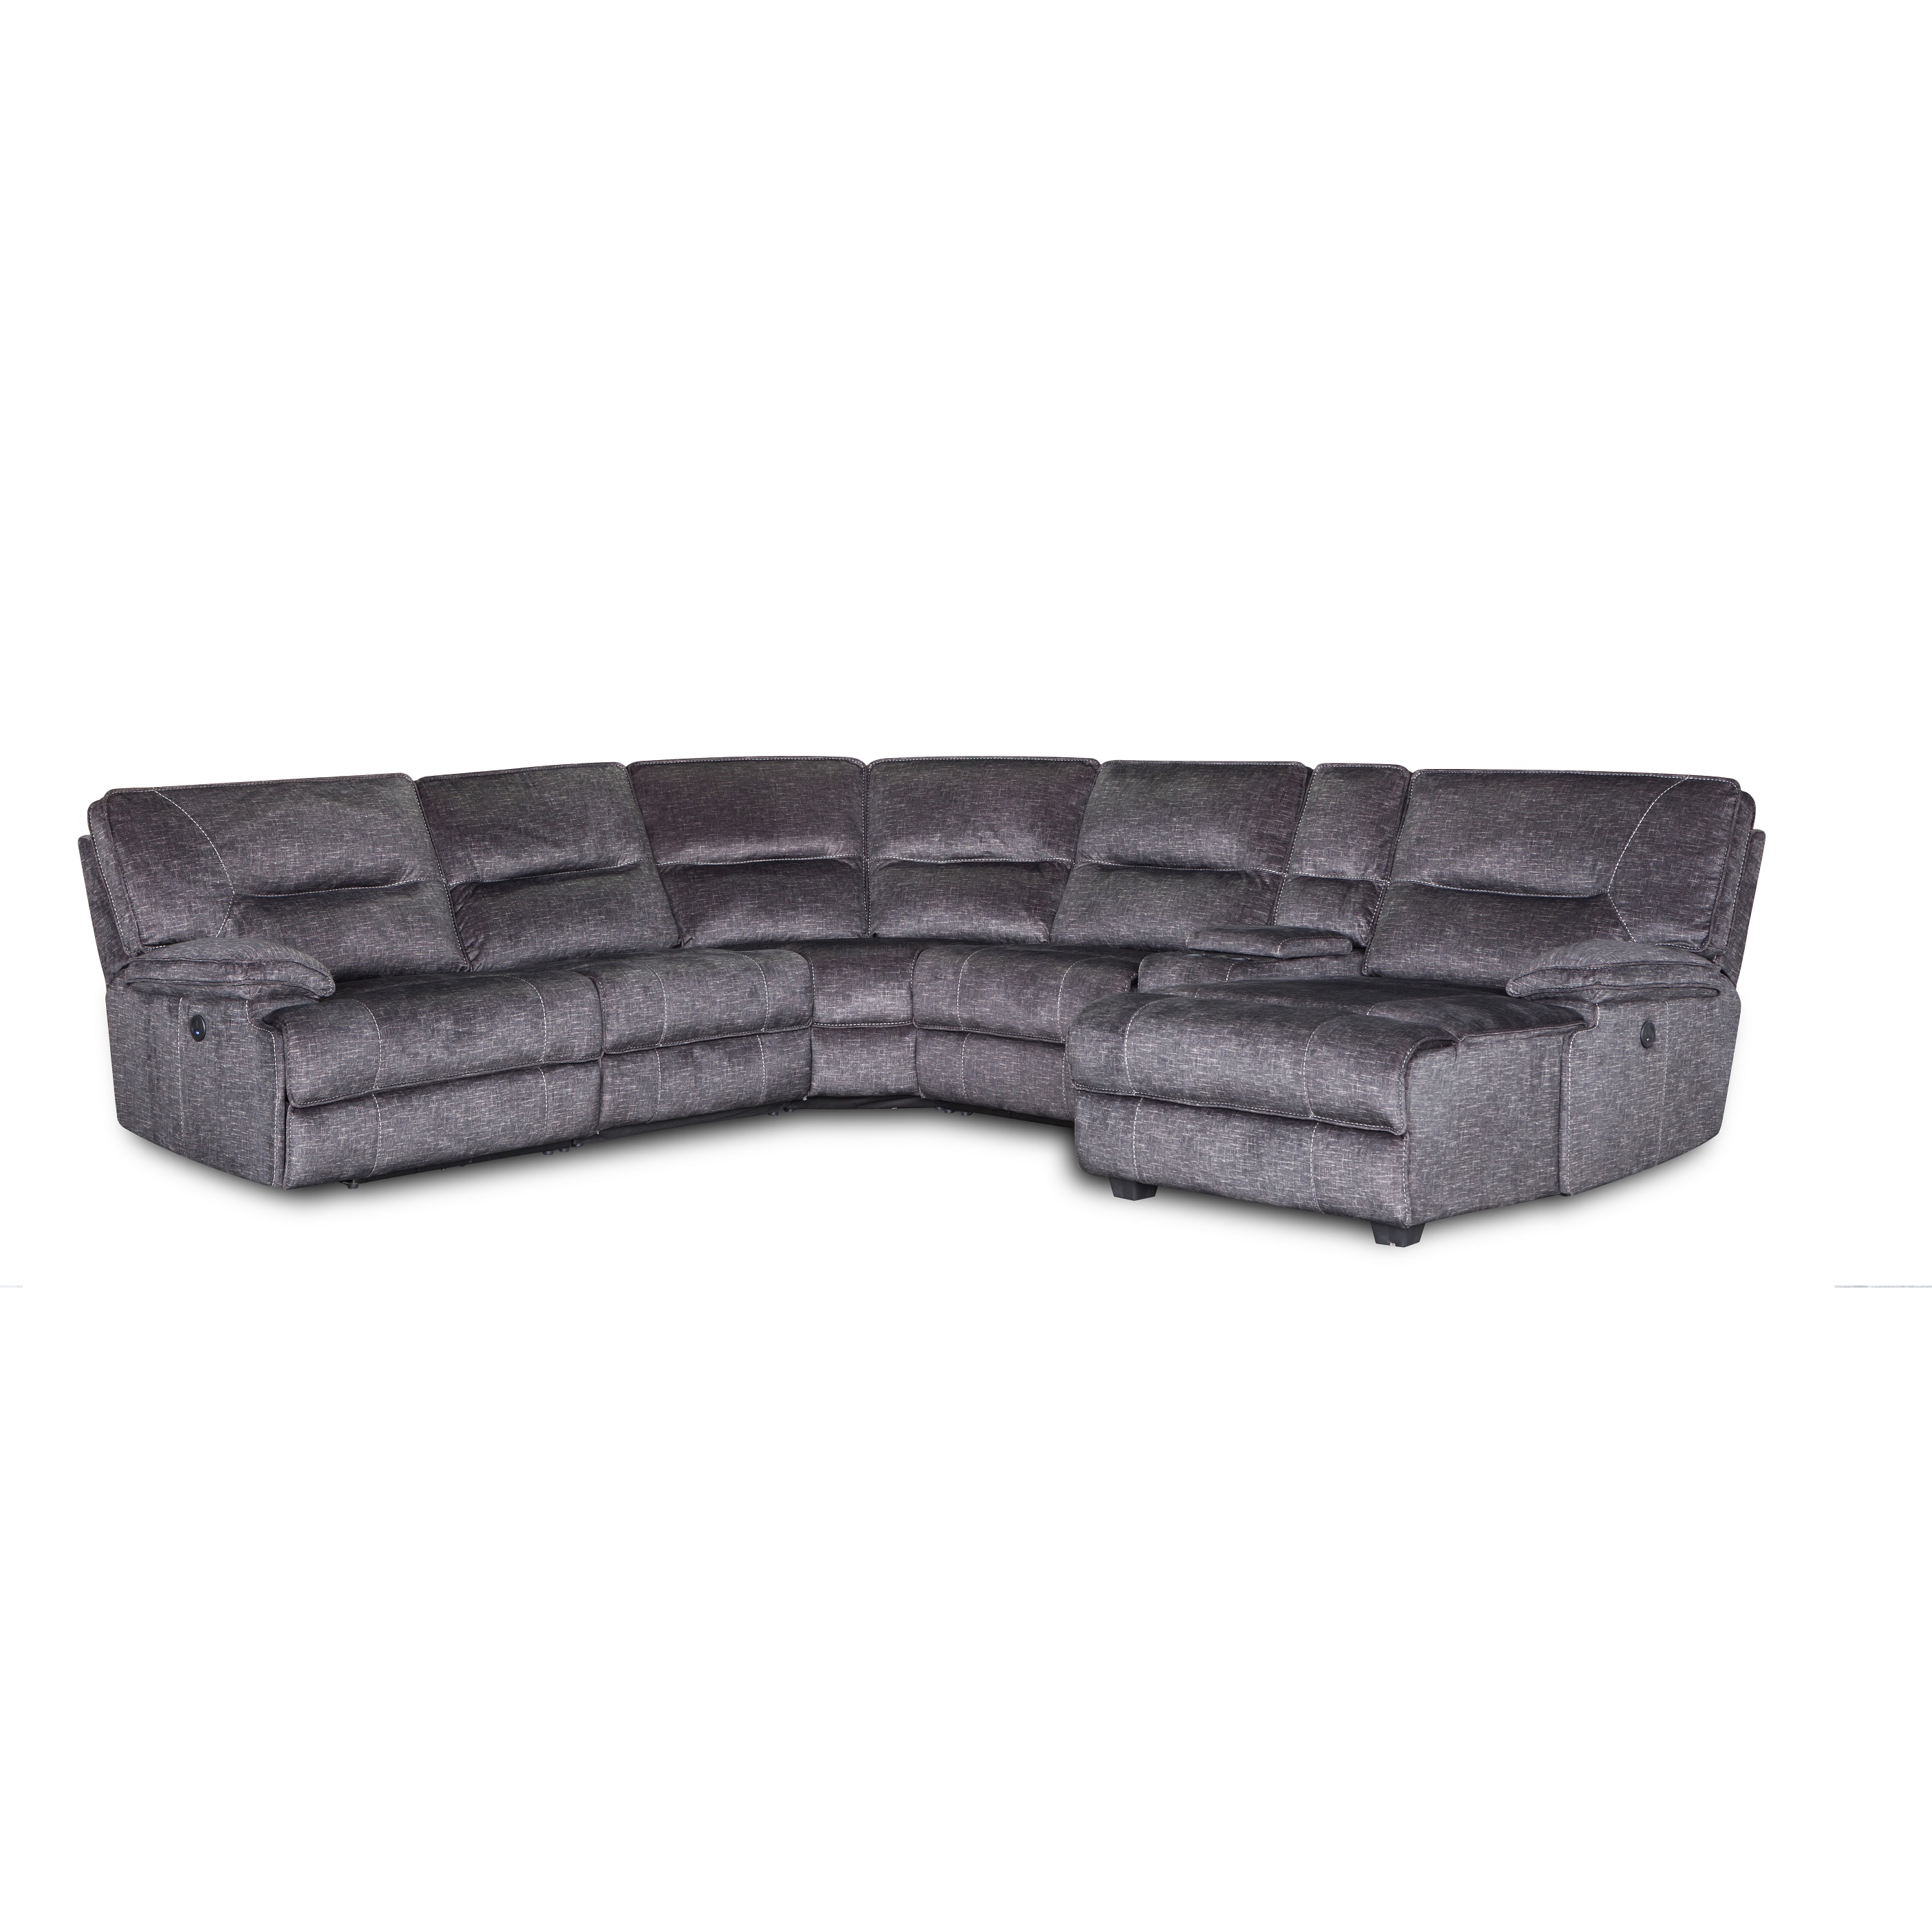 Modern Living Room Fabric Recliner Sectional Sofa With Chaise